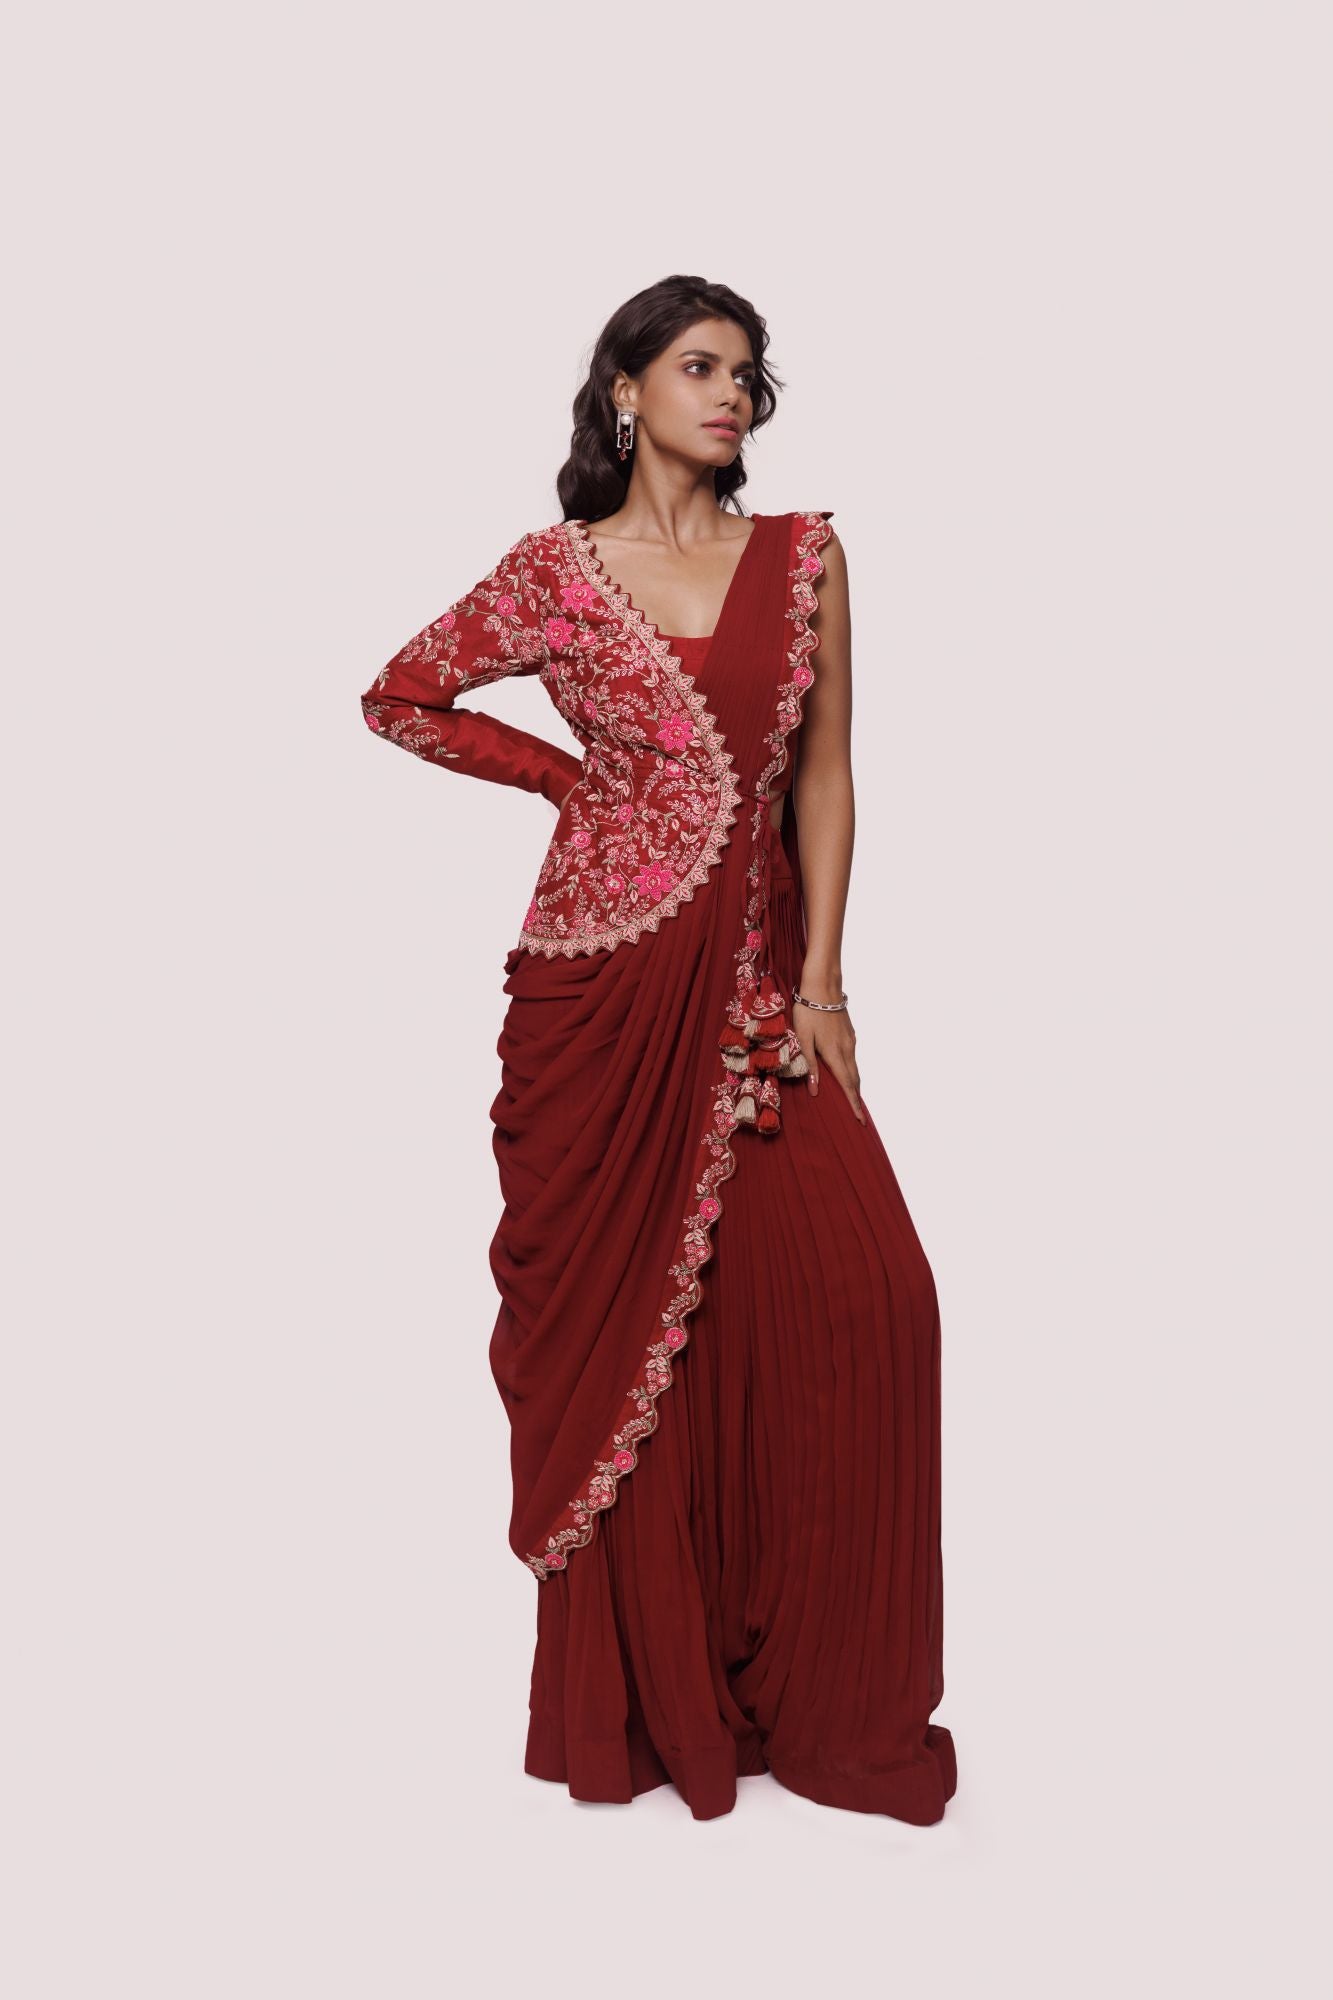 Buy beautiful dark red drape saree online in USA with embroidered half jacket. Look your best at parties and weddings in beautiful designer sarees, embroidered sarees, handwoven sarees, silk sarees, organza saris from Pure Elegance Indian saree store in USA.-side